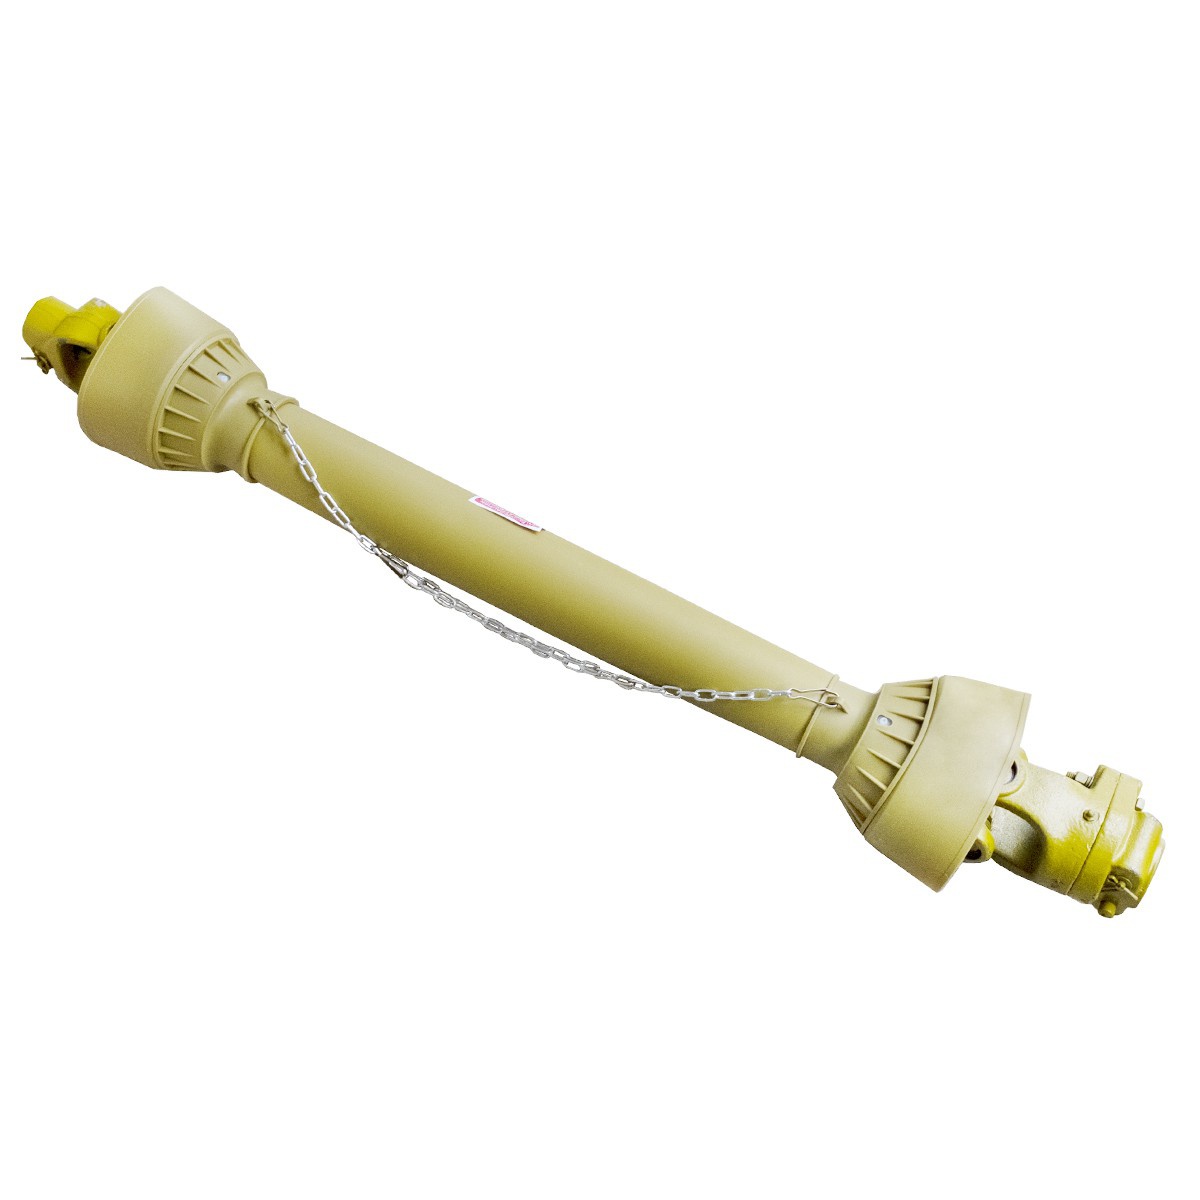 065b 60 100km approximately 900nm - PTO shaft with breakaway wedge 065B - 90 cm / up to 100 HP